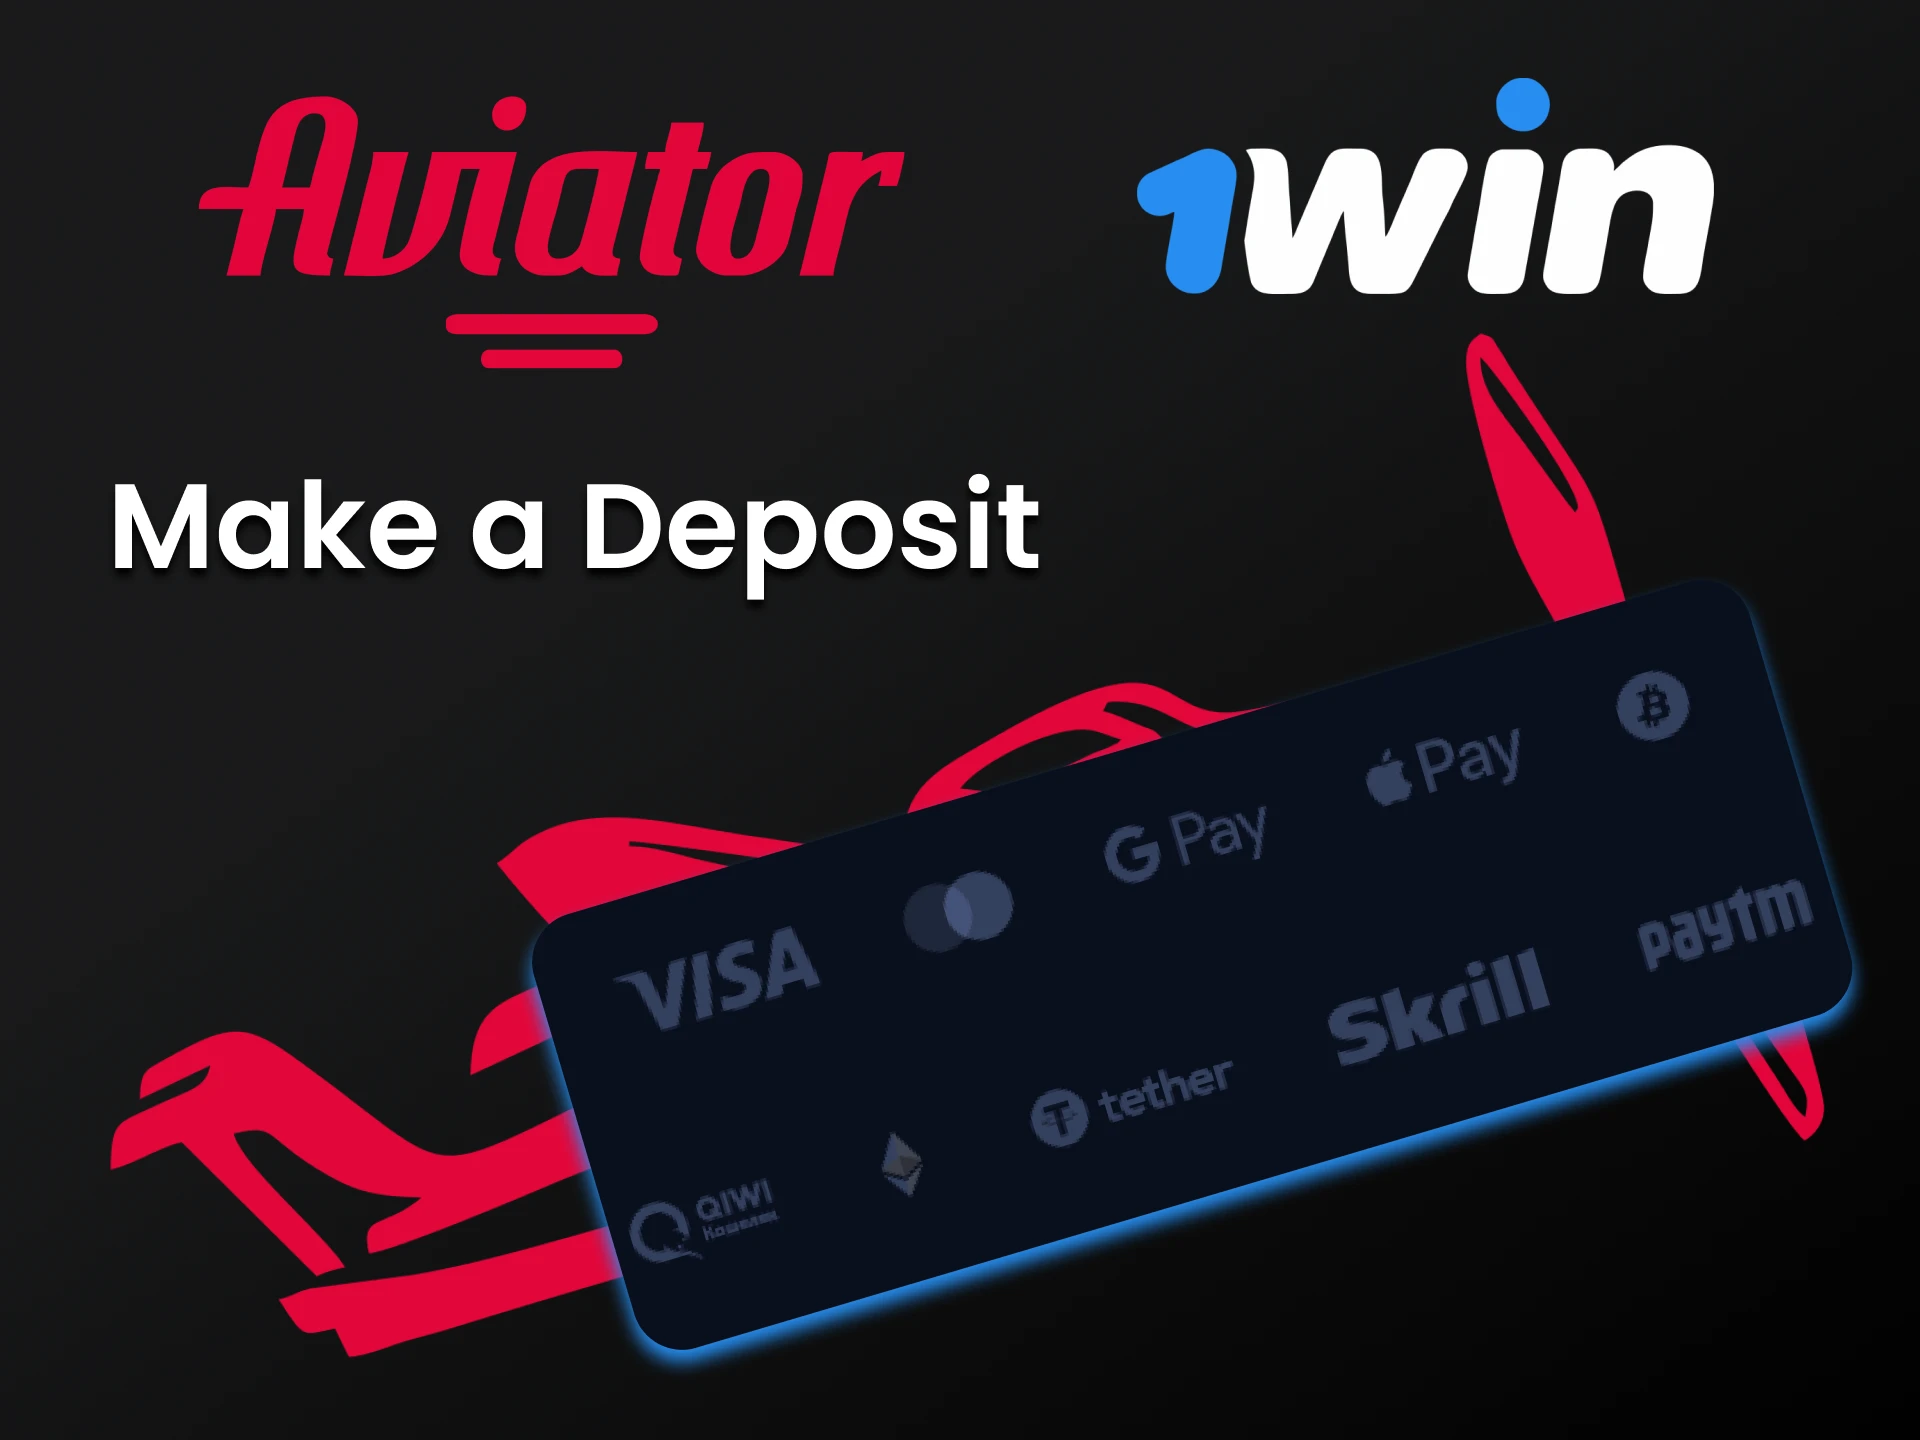 Choose a convenient way to replenish your account from 1win.